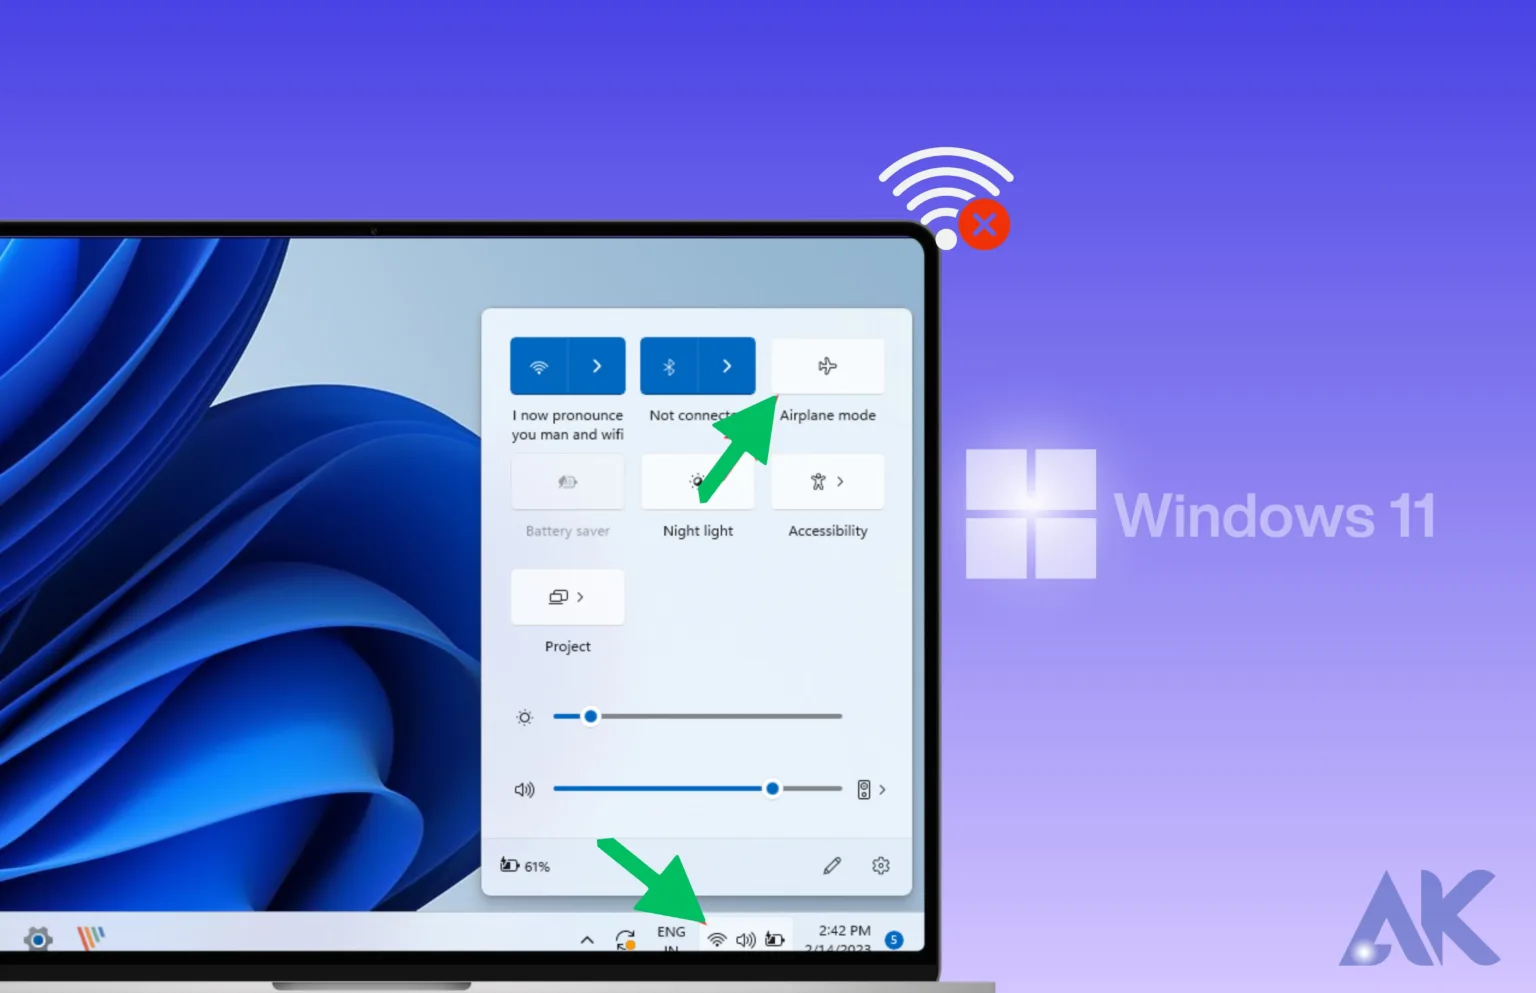 WiFi Woes Gone! Fix Windows 11 Connectivity Issues in Minutes